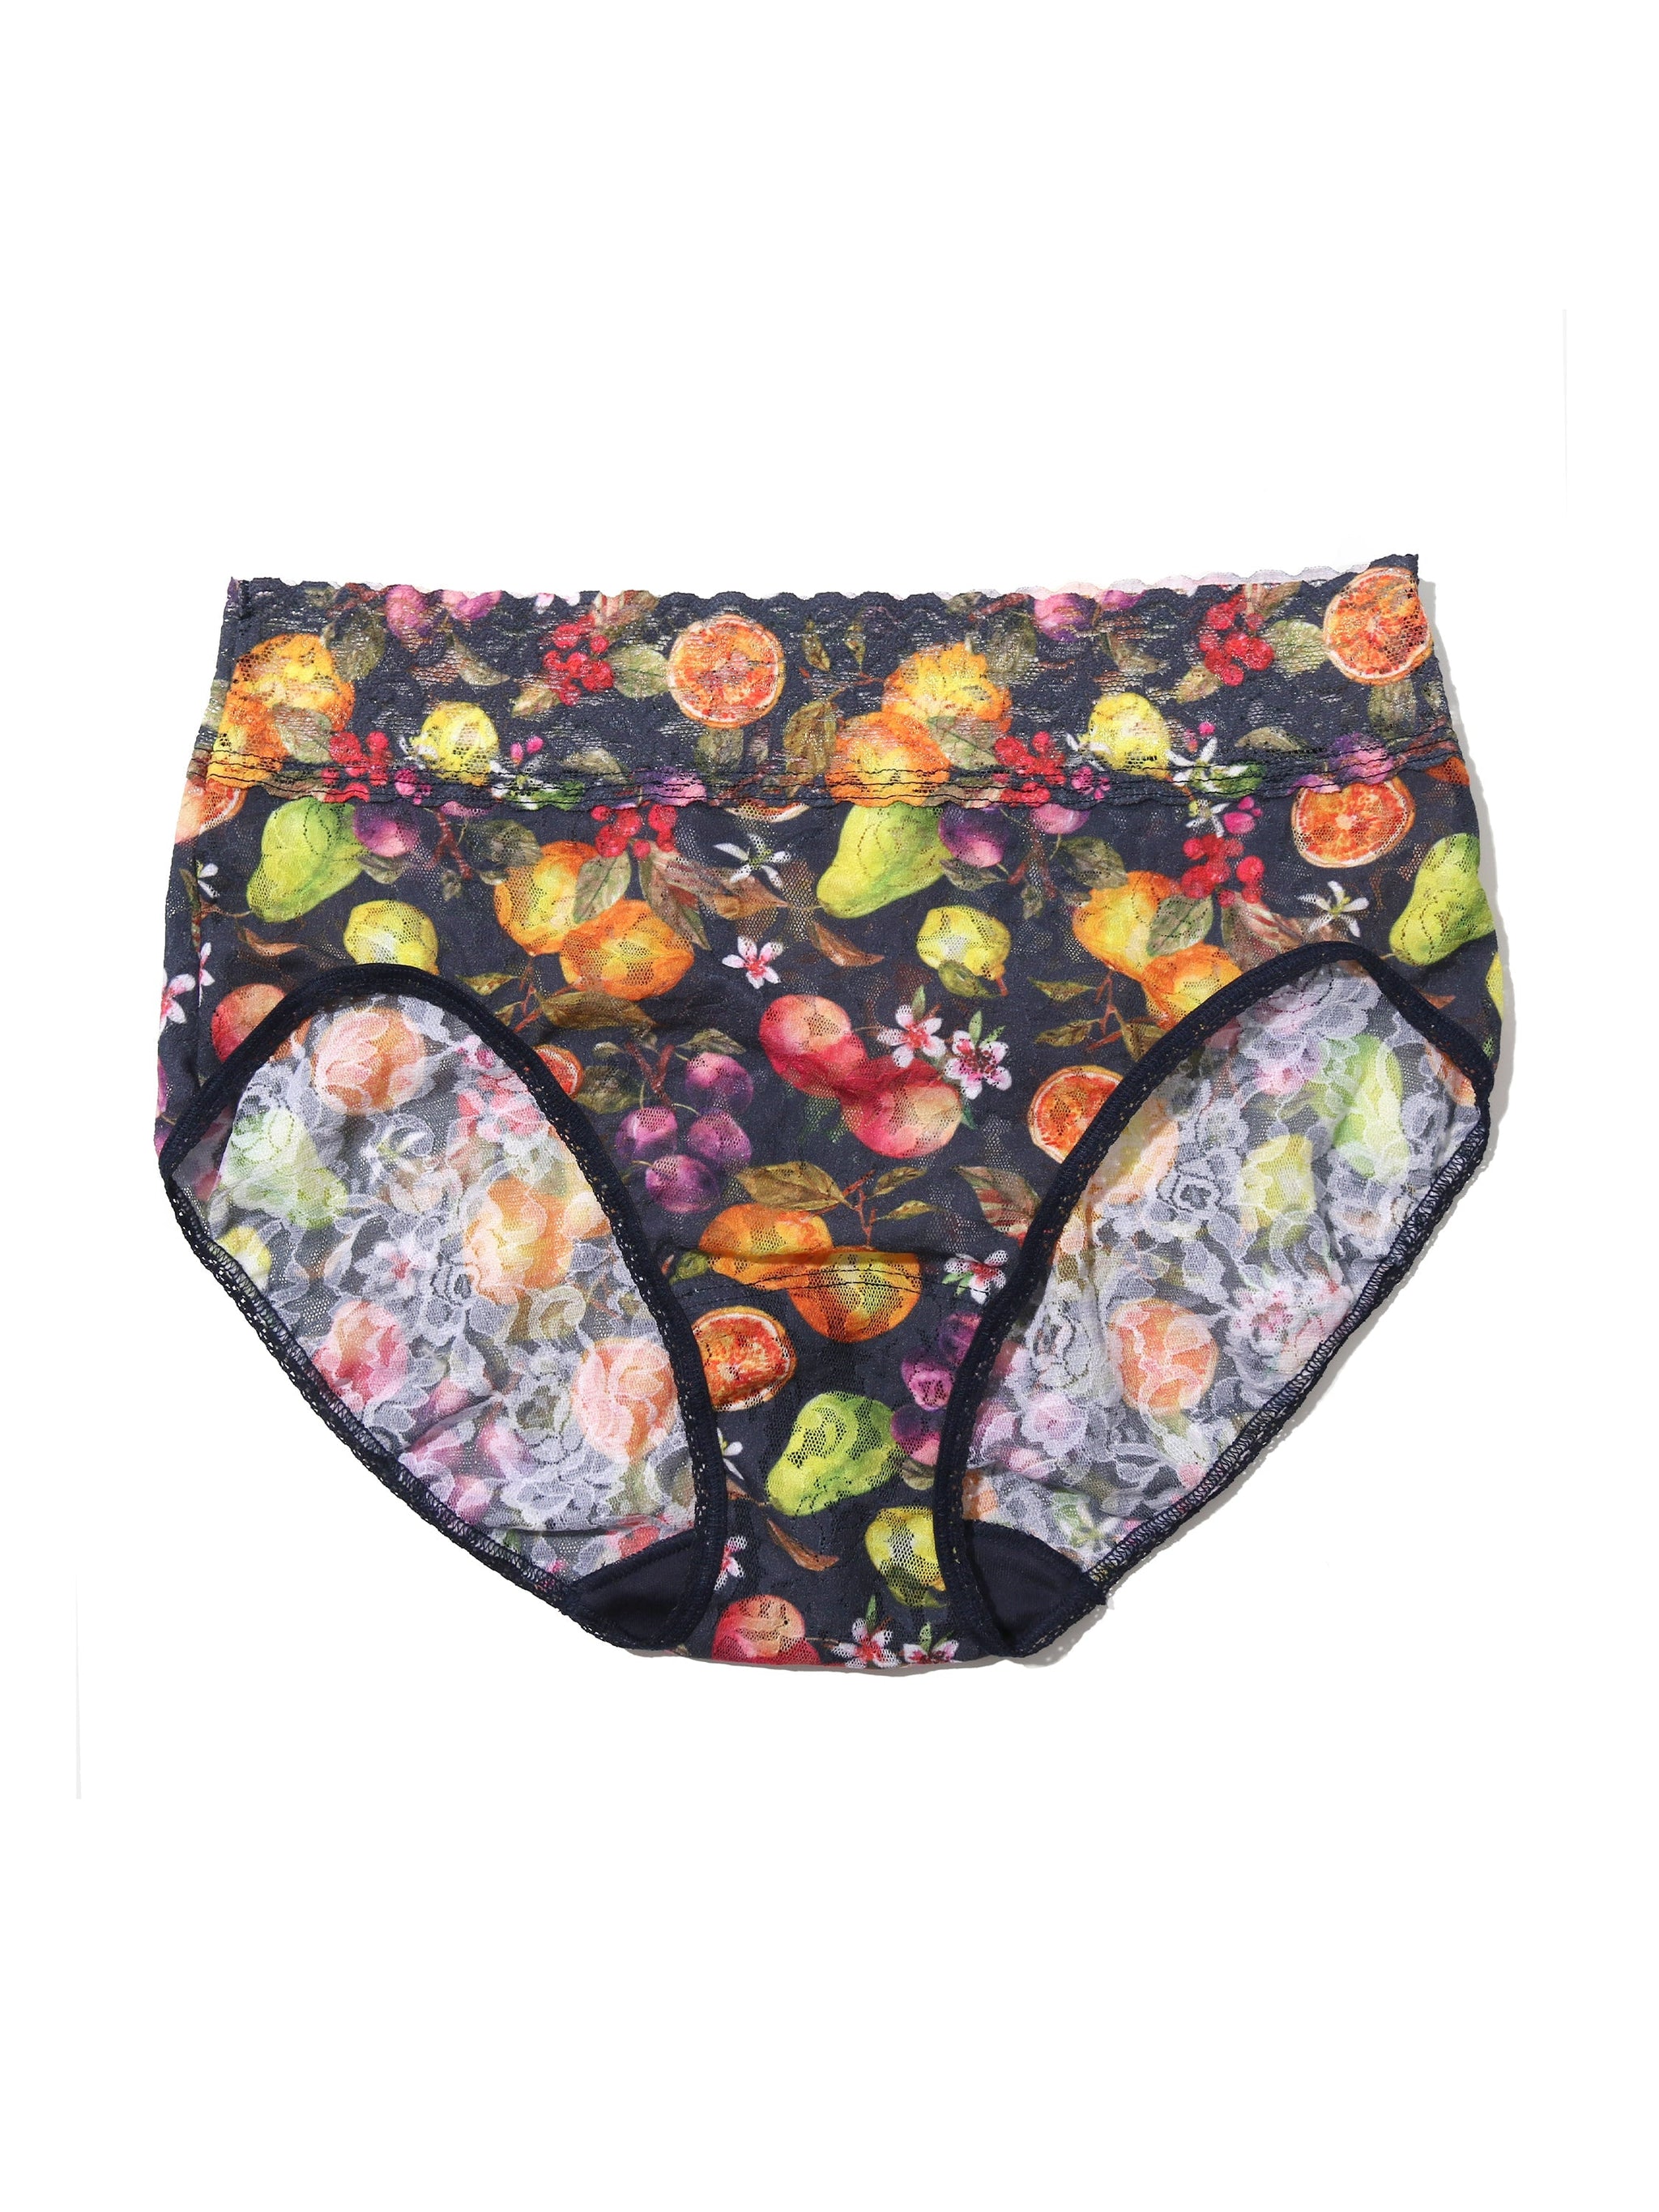 Printed Signature Lace French Brief Picnic For One Sale